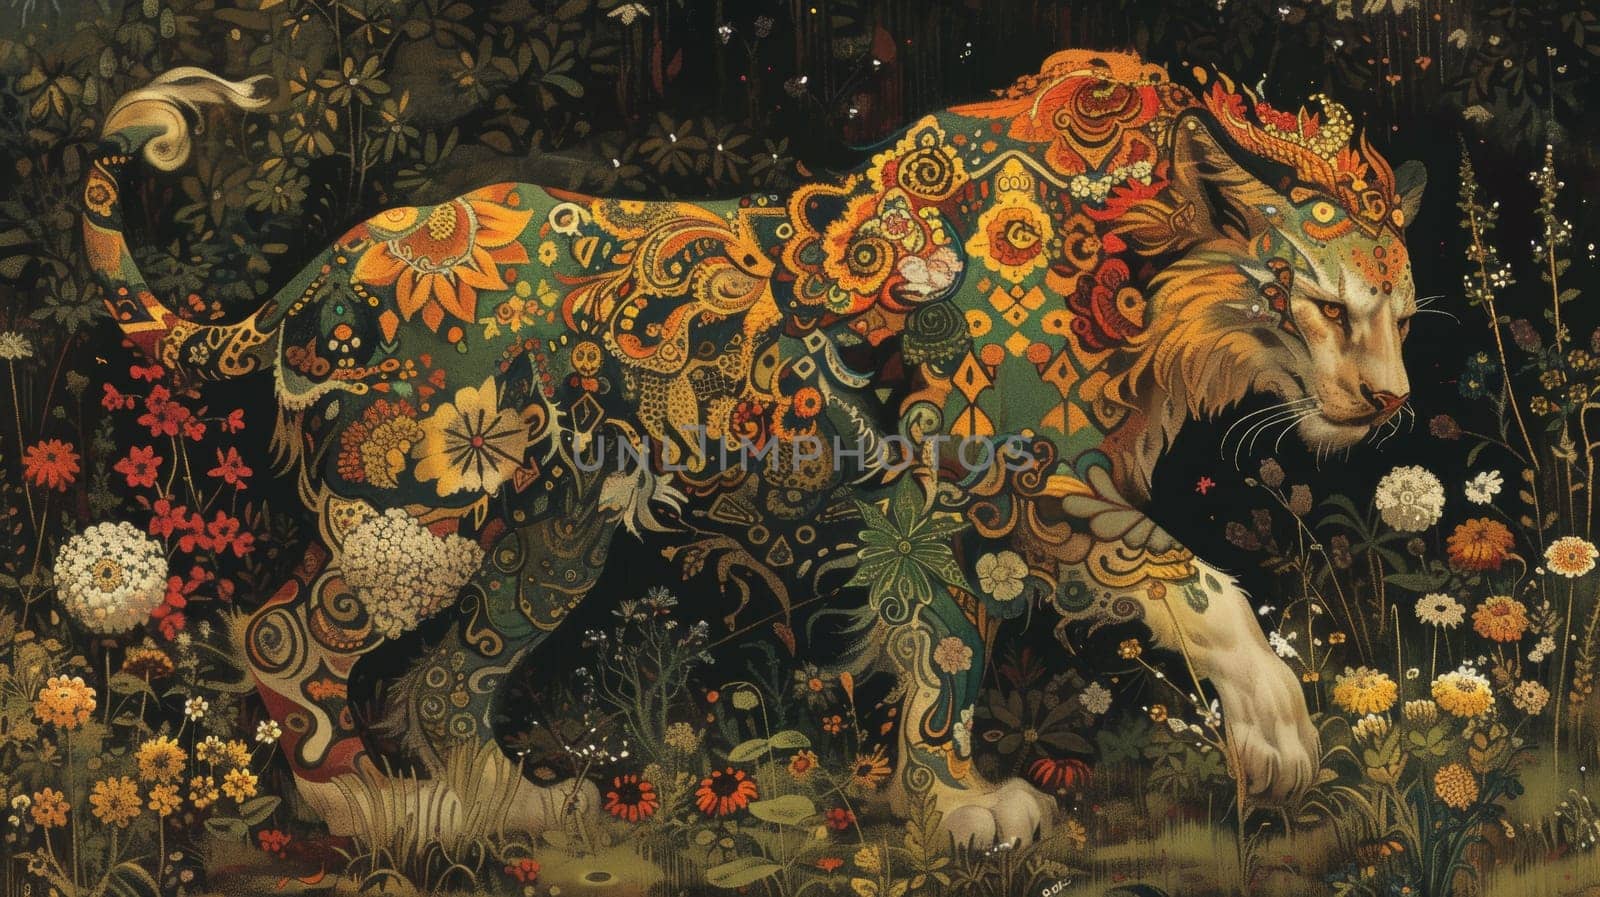 A painting of a large cat in the middle of flowers